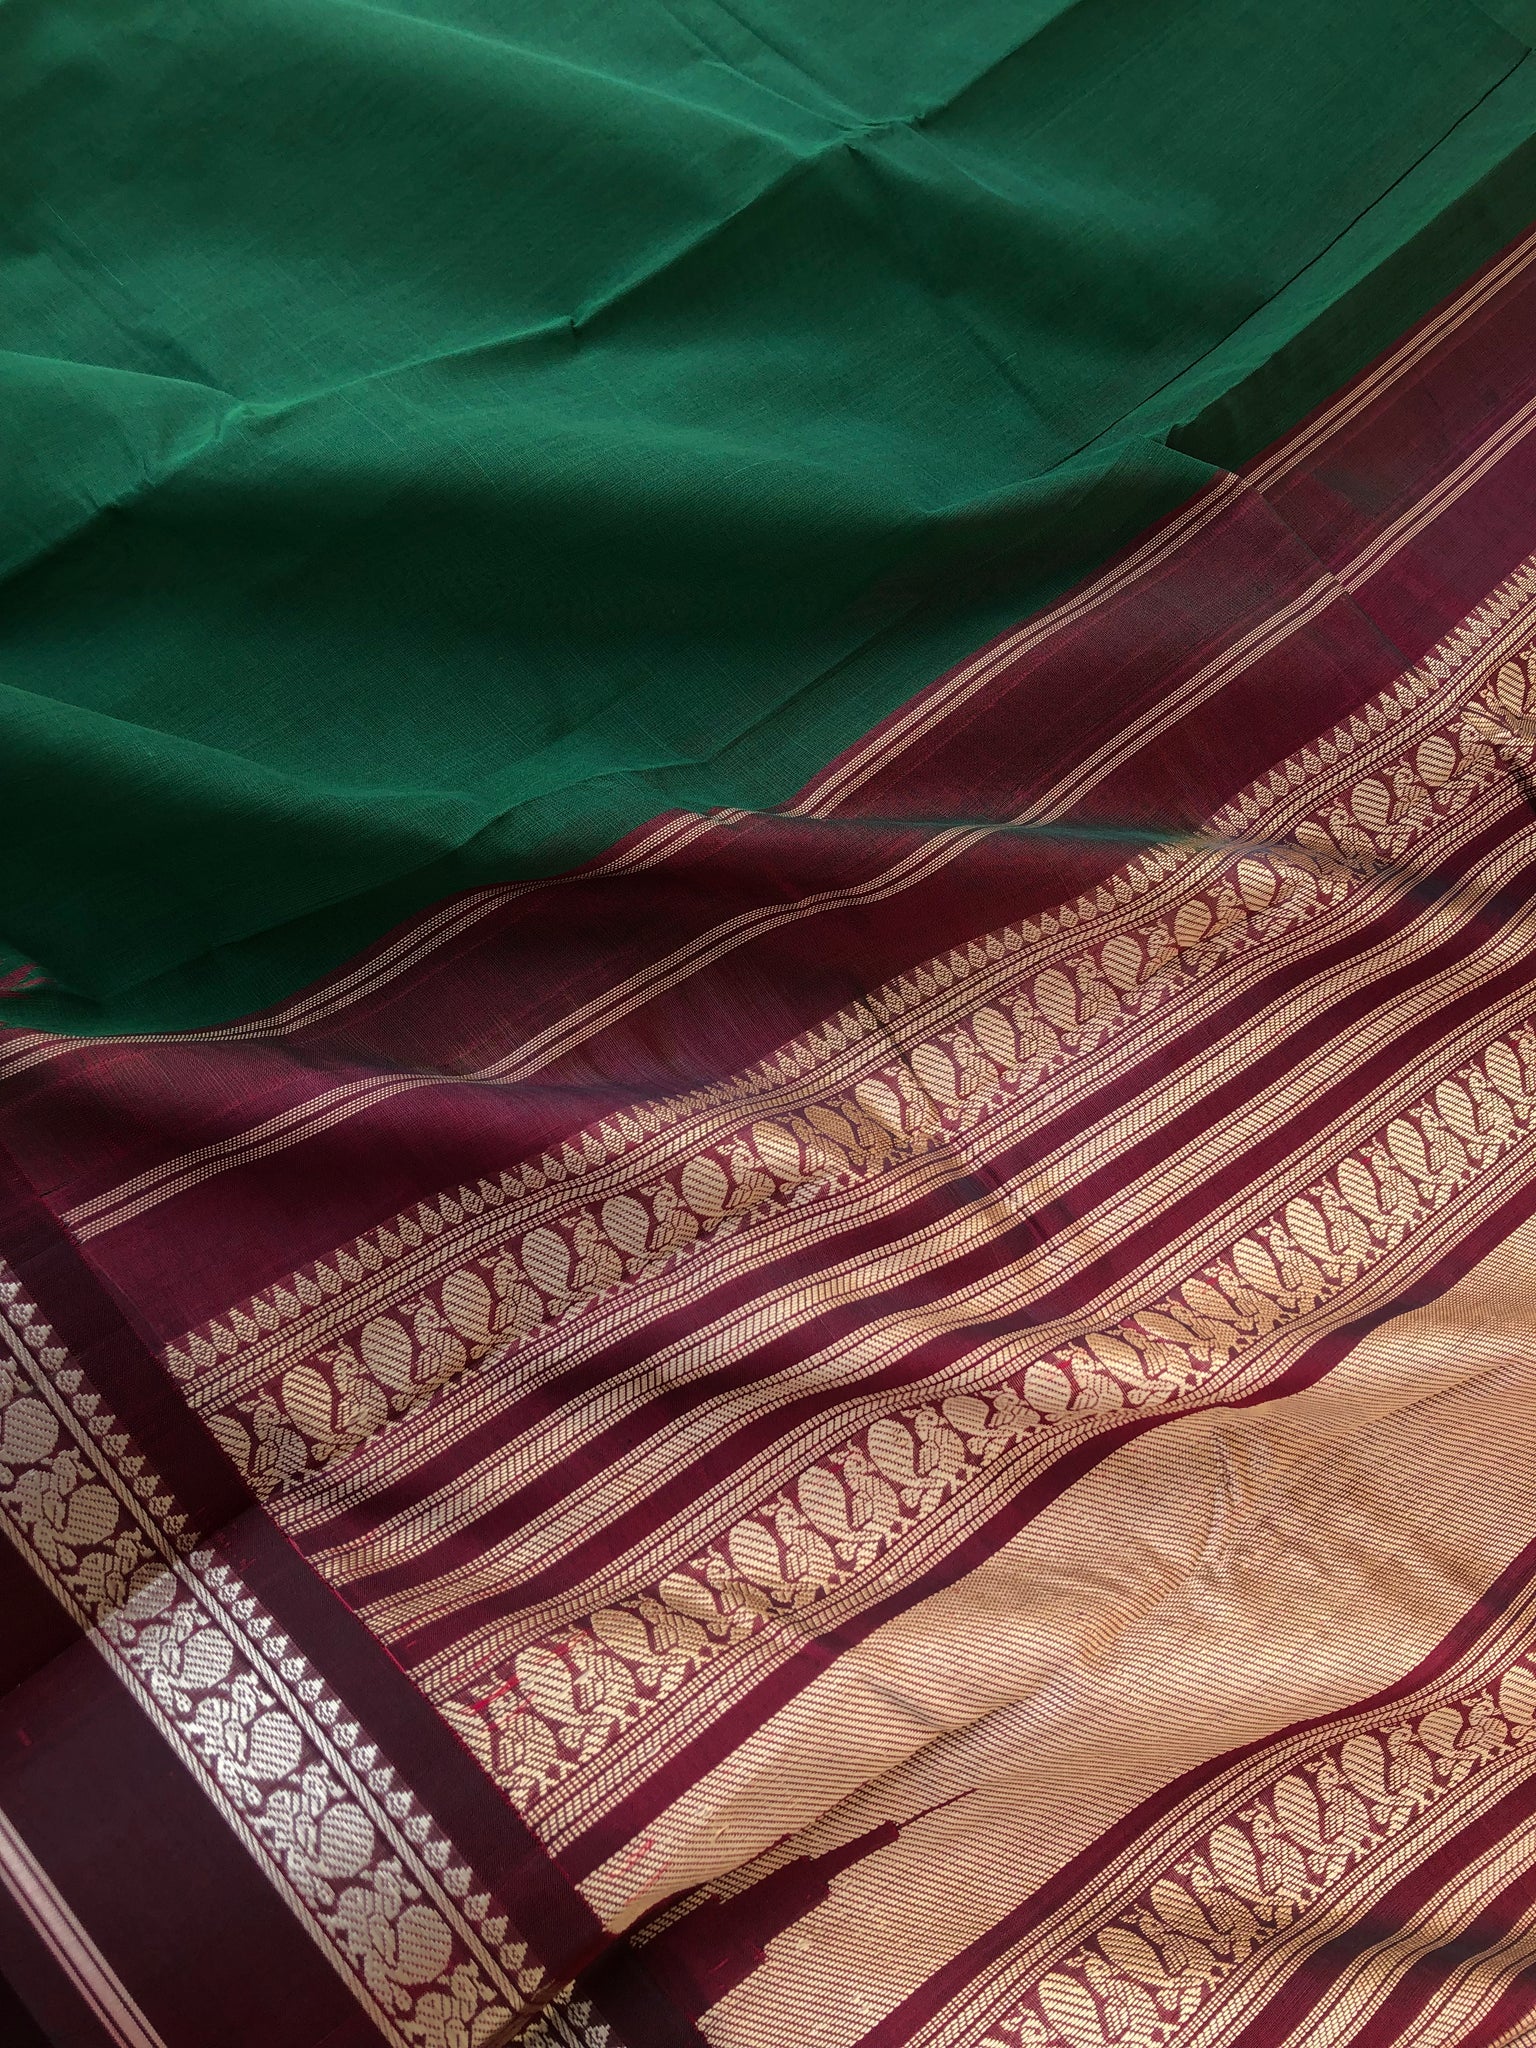 Cotton body with Pure Silk Borders - most traditional deepest Meenakshi green and maroon